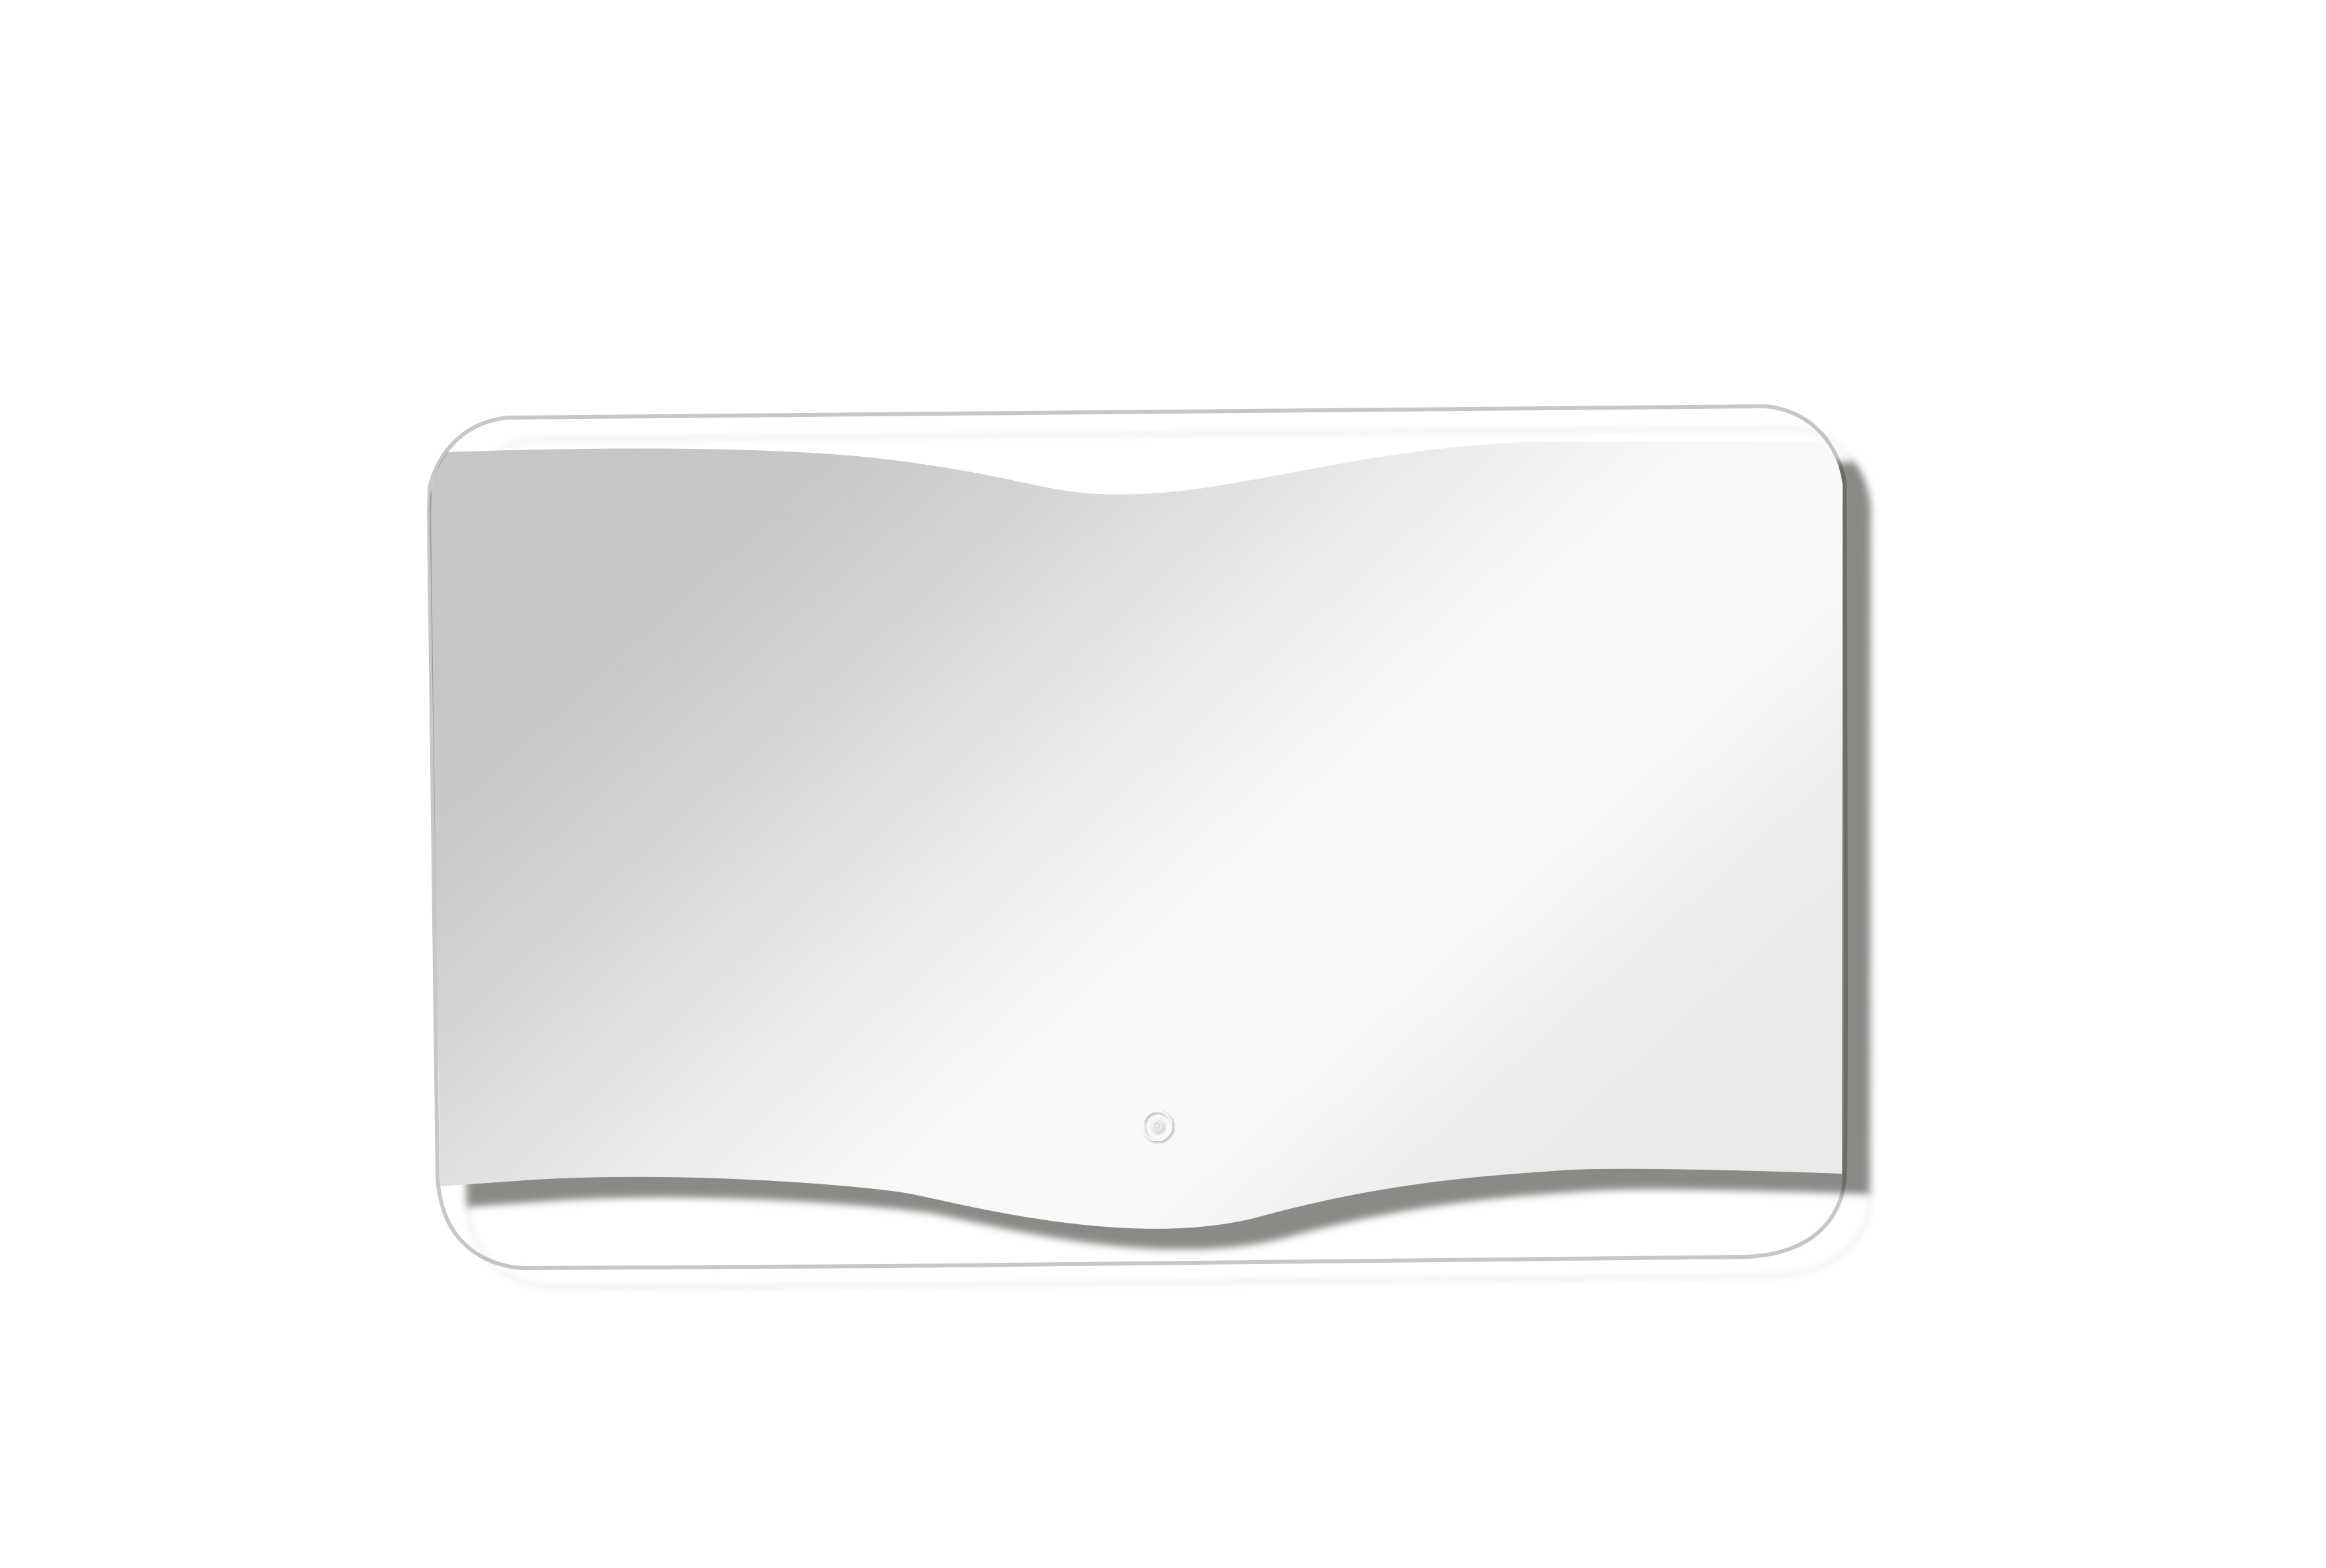 LED-Backlit Contemporary Mirror 35.43x23.62" w/Touch Sensor